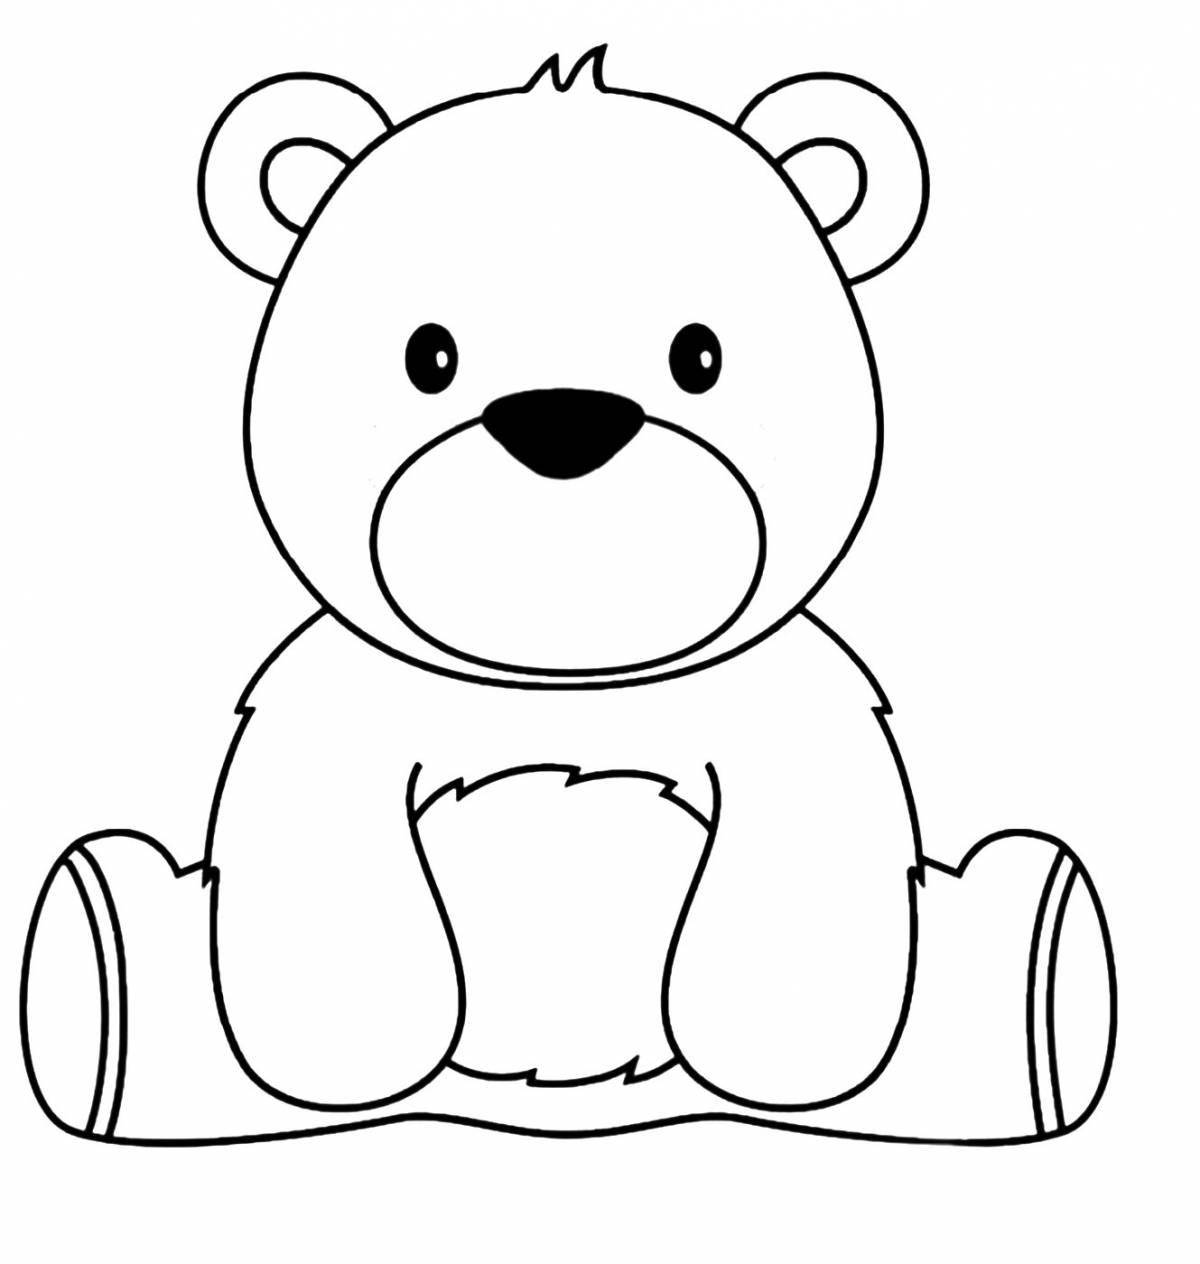 Naughty teddy bear coloring page